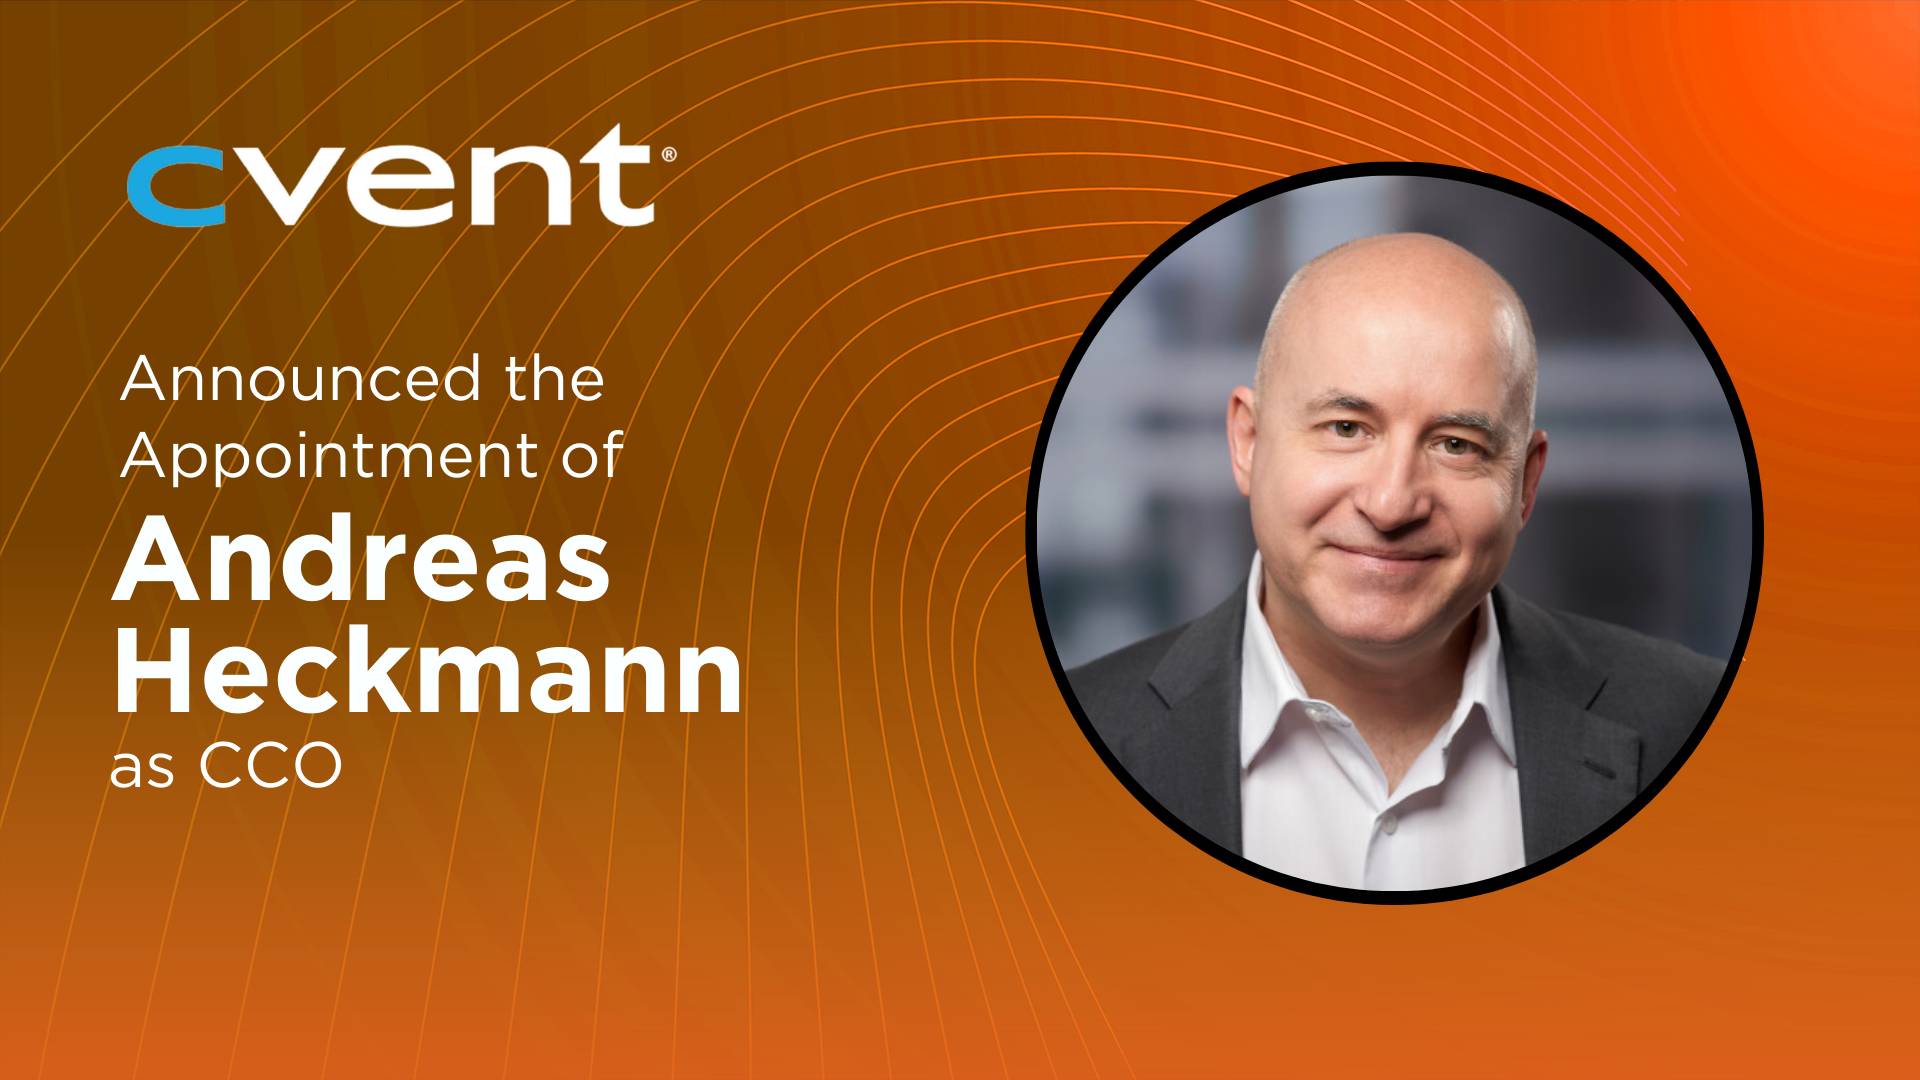 Cvent Appoints Andreas Heckmann as Chief Customer Officer to Drive Client Success